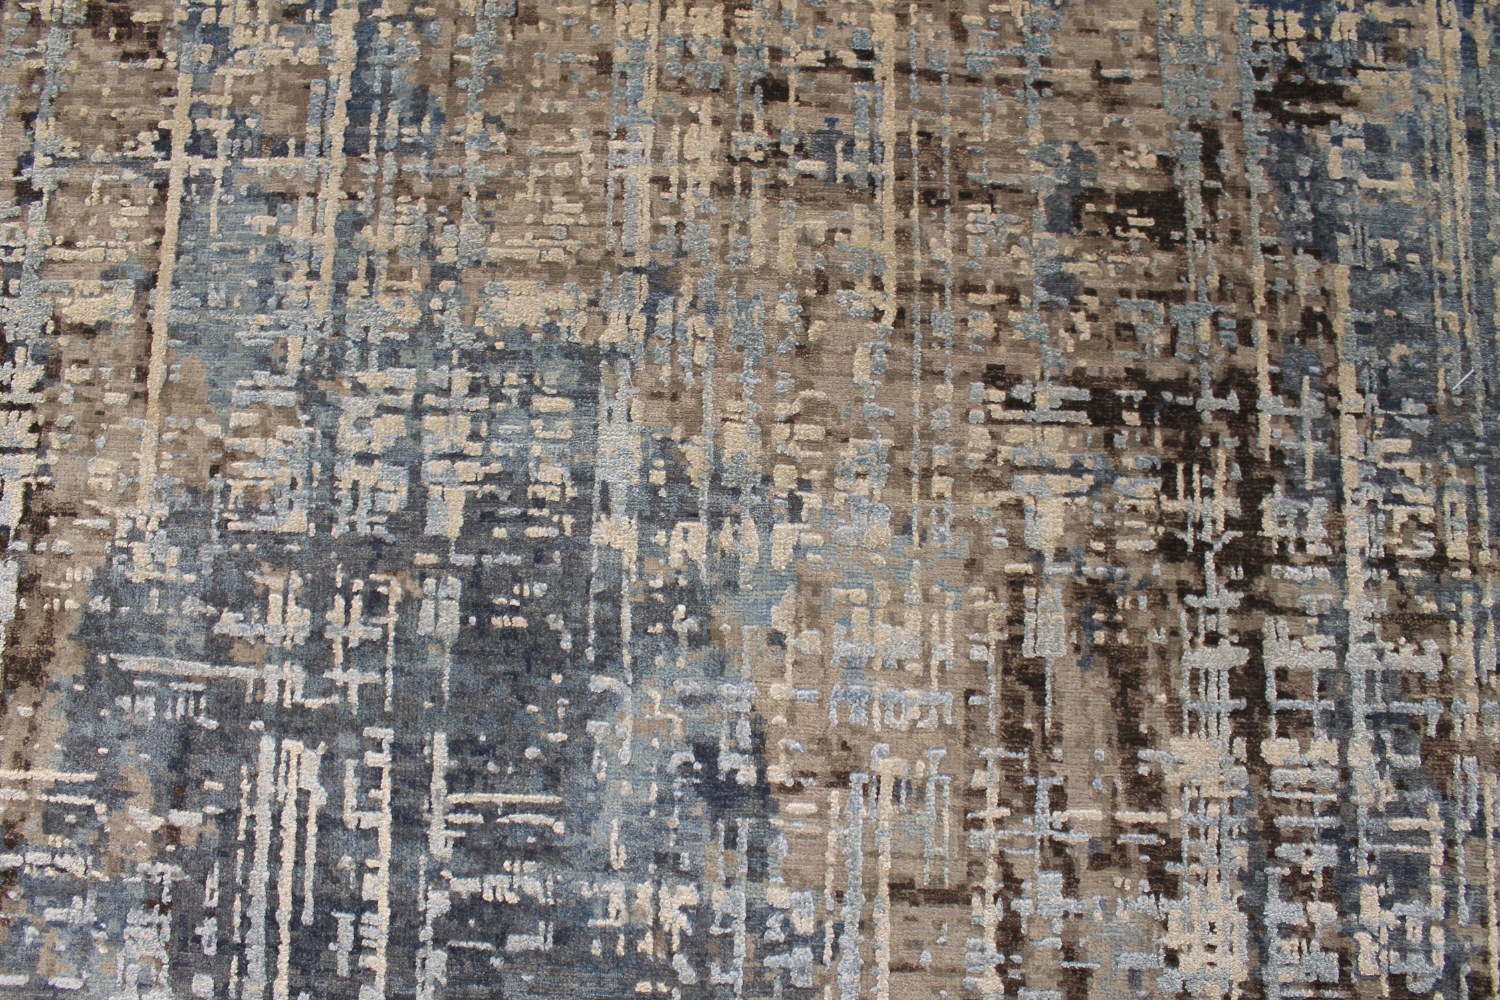 9x12 Modern Hand Knotted Wool & Viscose Area Rug - MR027473